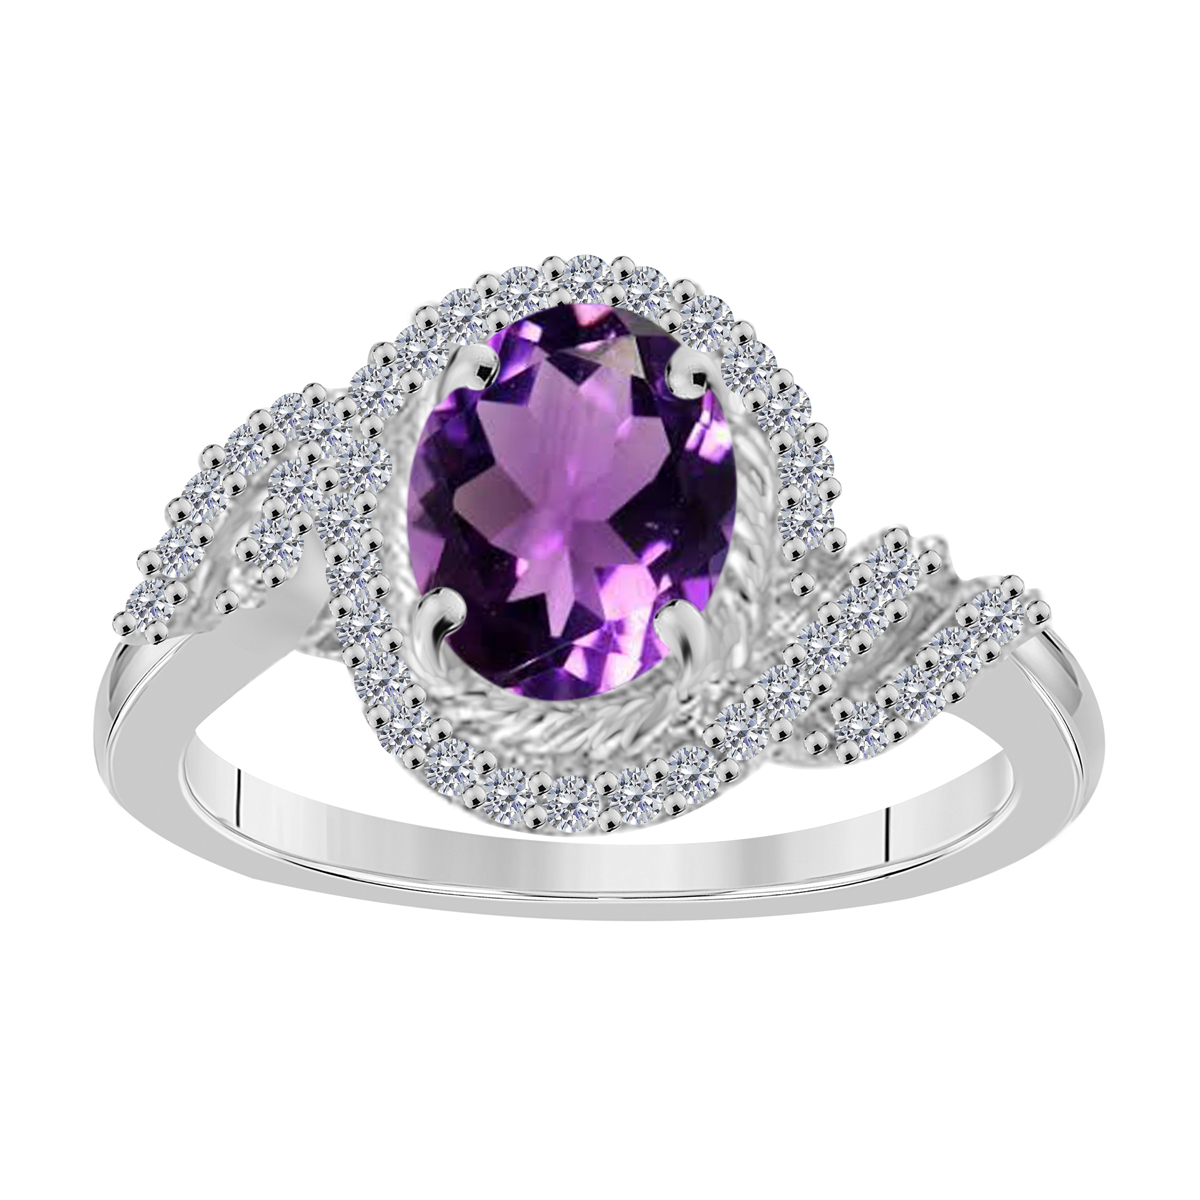 Aone Rings for Women 1.45 Carat Diamond Oval  Amethyst Ring 4 Prong 10K White Gold